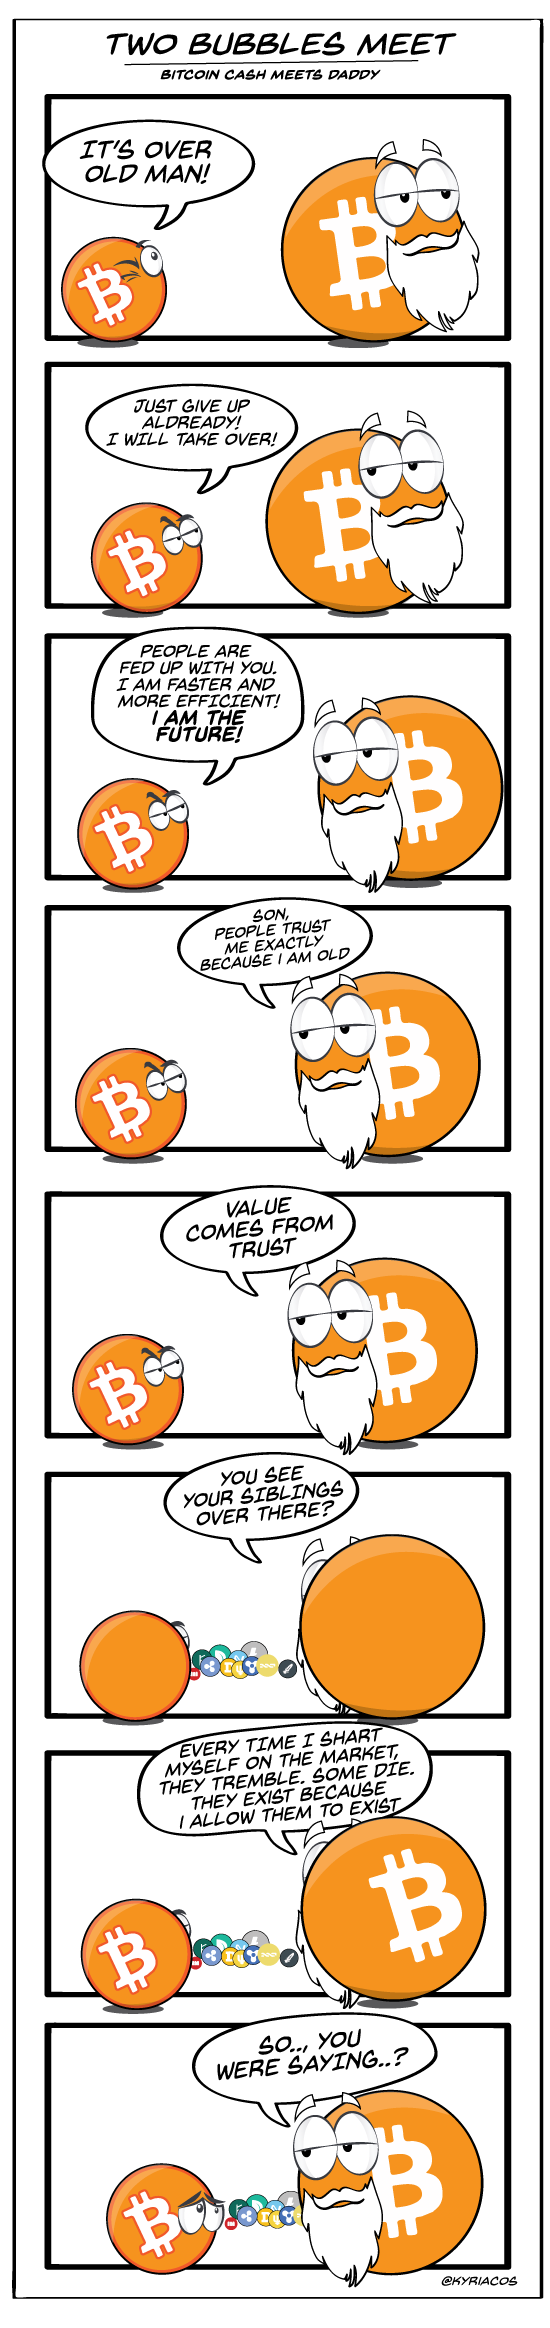 bitcoin-cash-meets-daddy.png